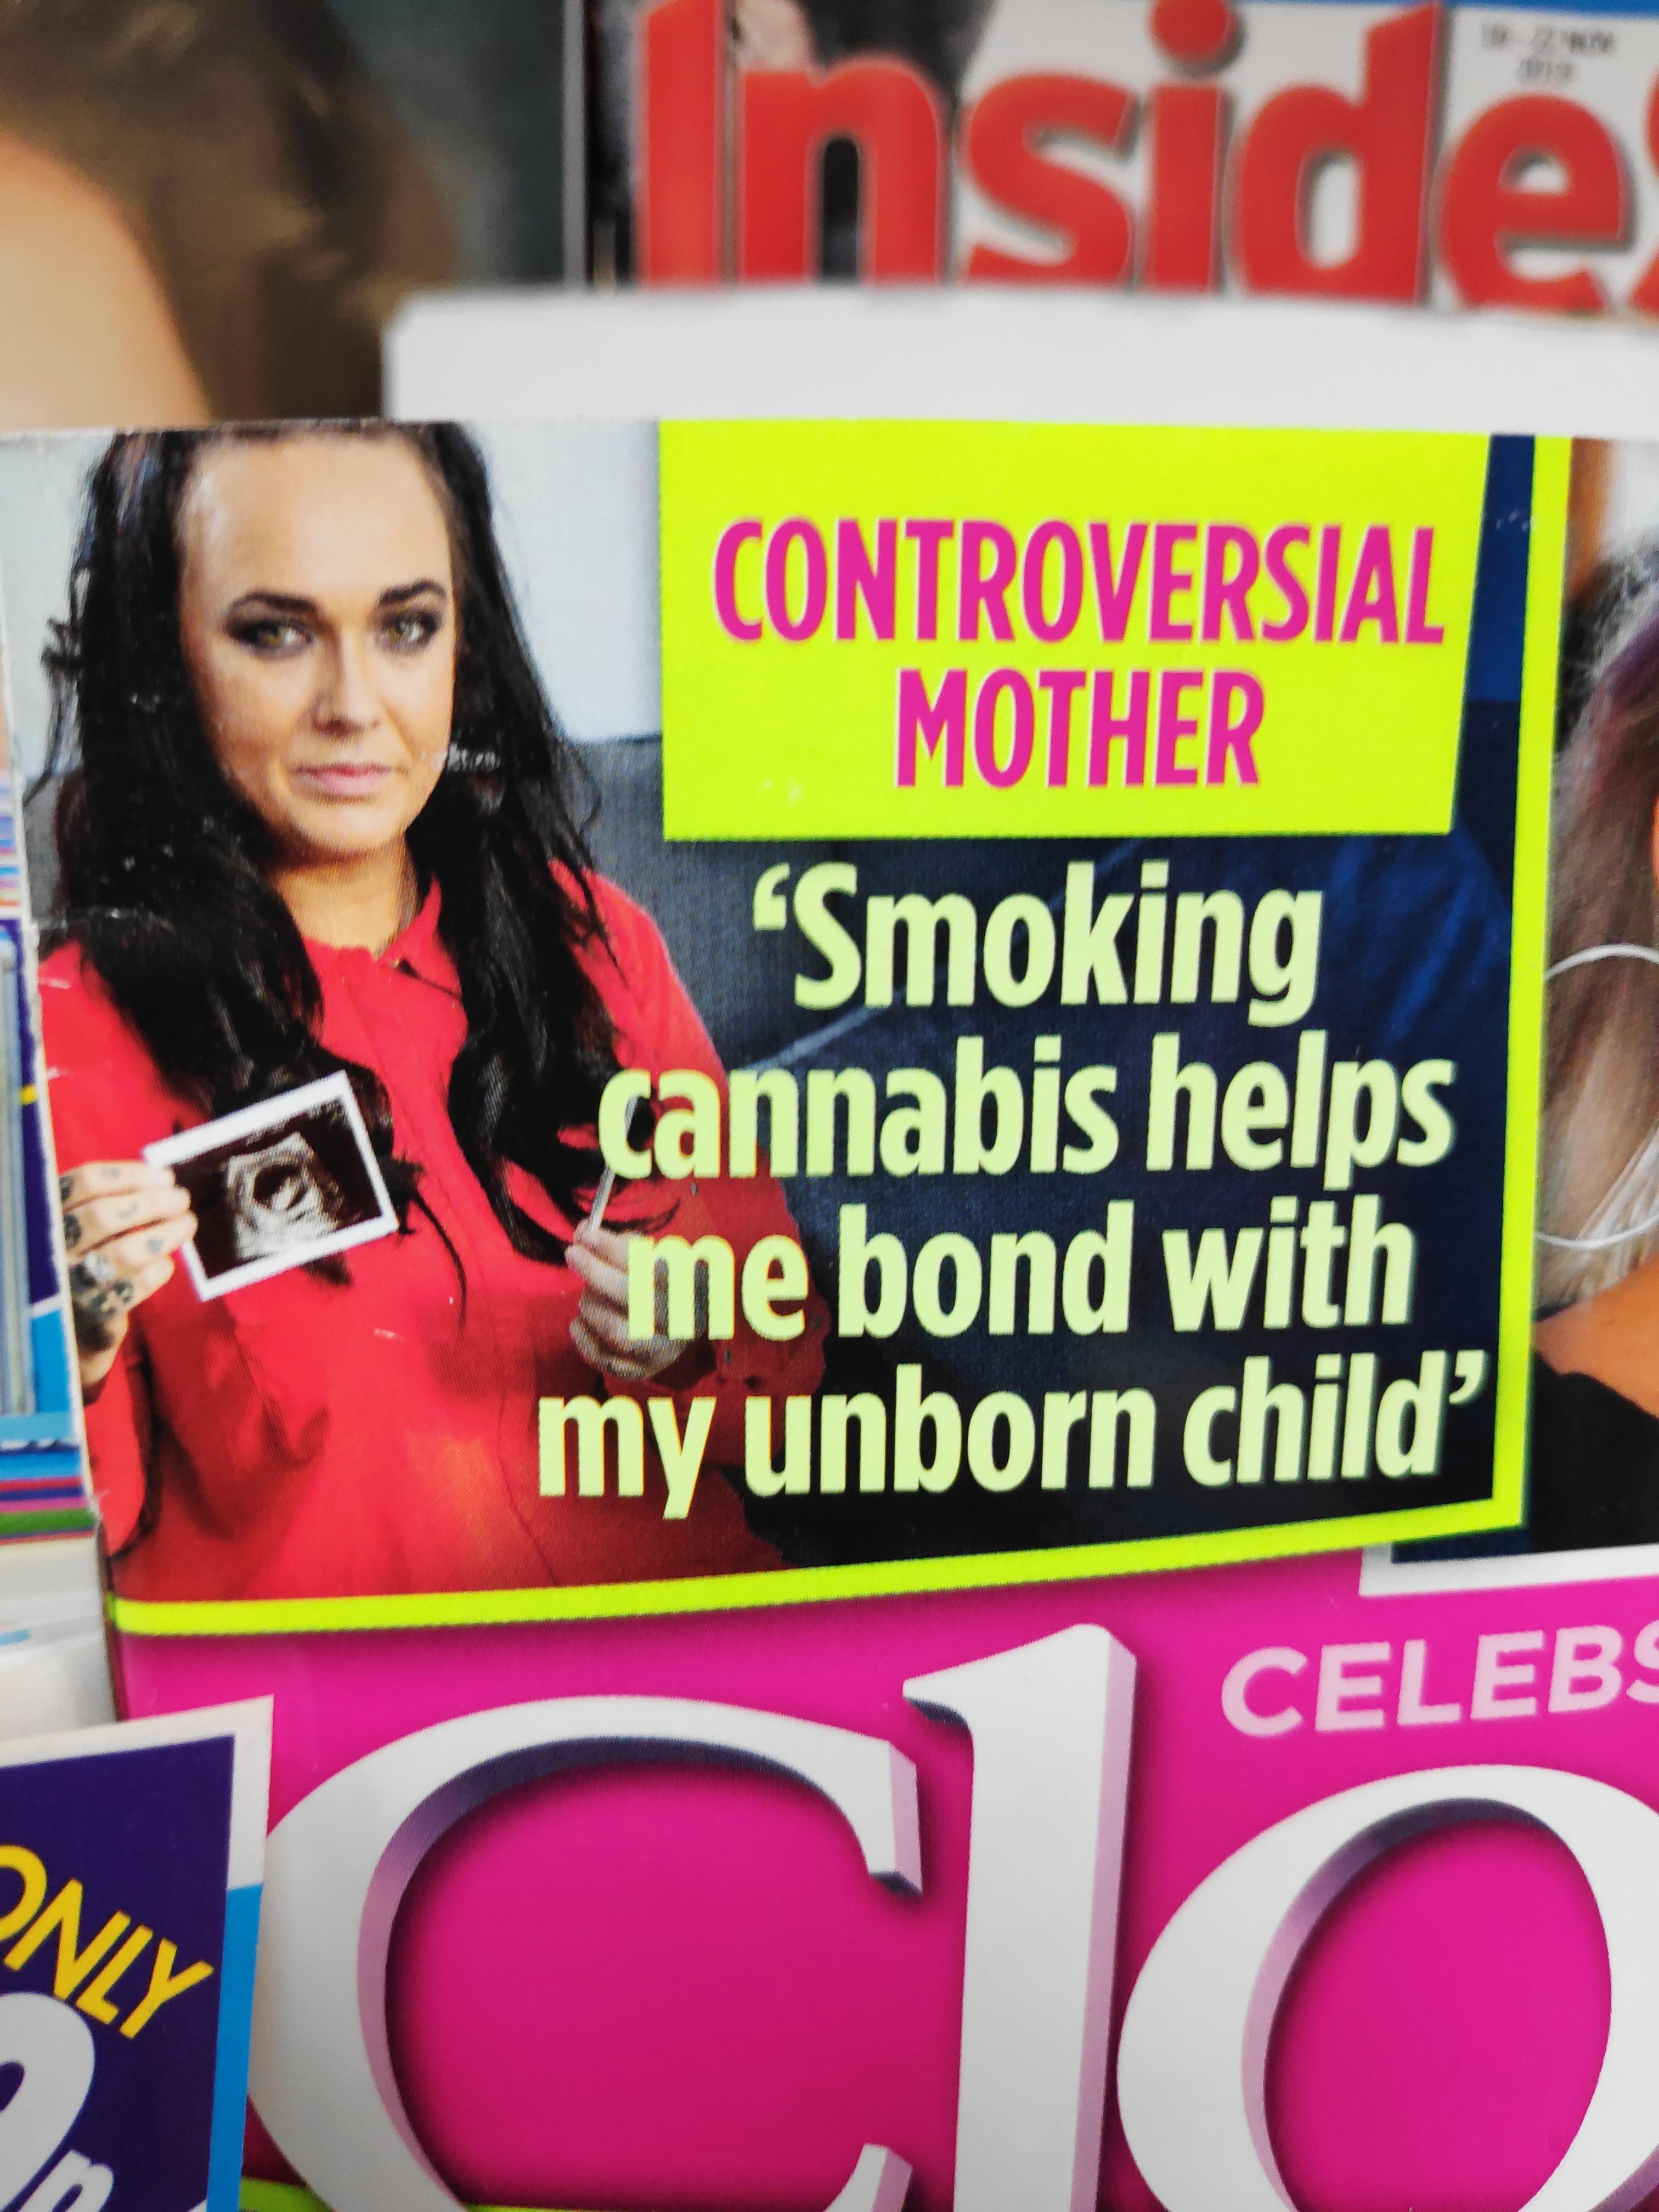 banner - hside Controversial Mother Smoking cannabis helps me bond with my unborn child Celebs Pnly